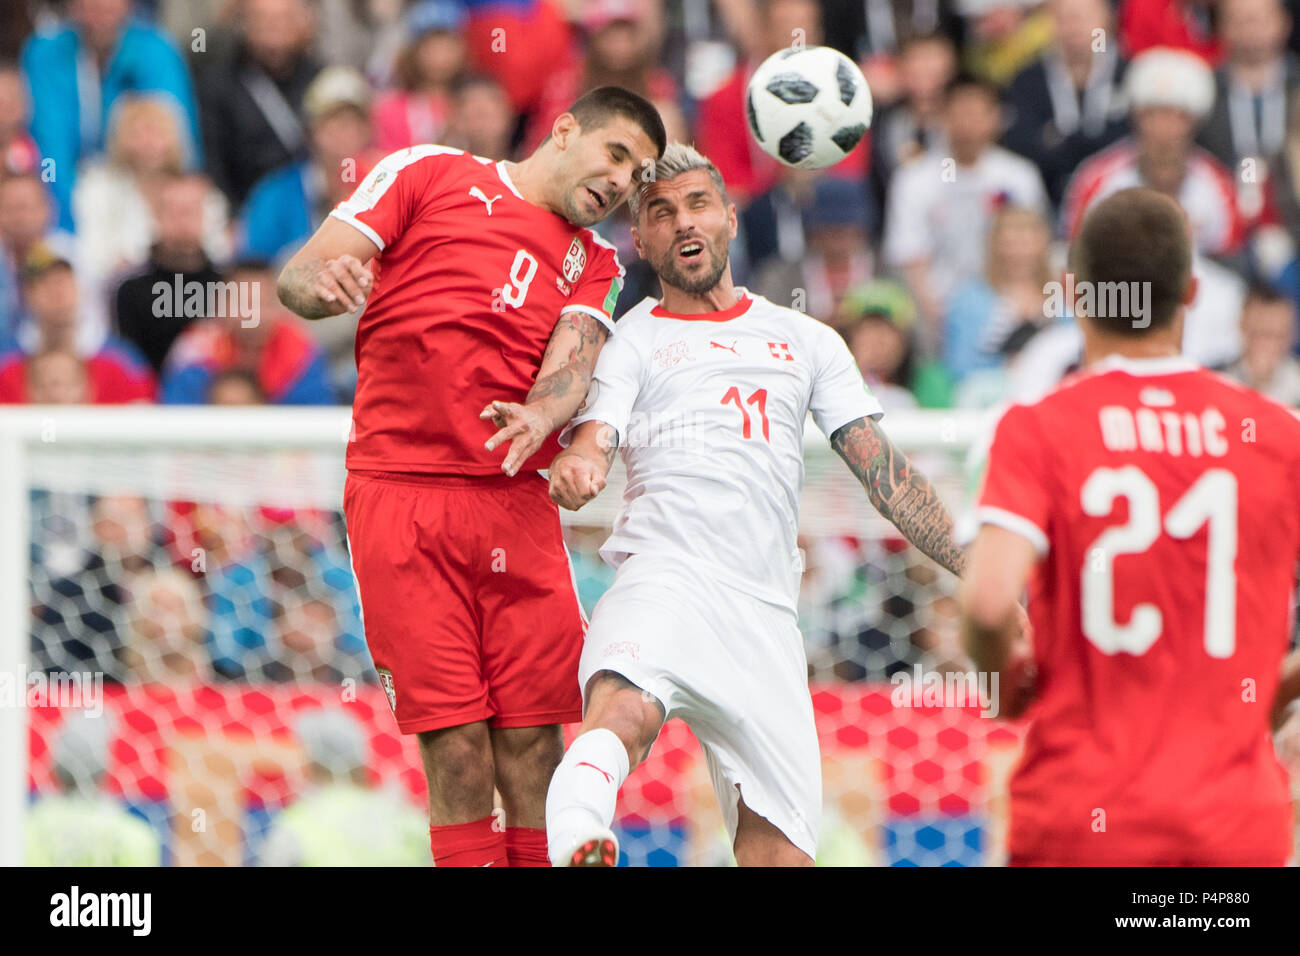 Kaliningrad, Russland. 22nd June, 2018.Kaliningrad, Russland. 22nd June, 2018. Aleksandar MITROVIC (left, SRB) versus Valon BEHRAMI (SUI), Action, duels, Serbia (SRB) - Switzerland (SUI) 1: 2, Preliminary Round, Group E, Match 26, on 22.06.2018 in Kaliningrad; Football World Cup 2018 in Russia from 14.06. - 15.07.2018. | usage worldwide Credit: dpa/Alamy Live News Credit: dpa picture alliance/Alamy Live News Stock Photo